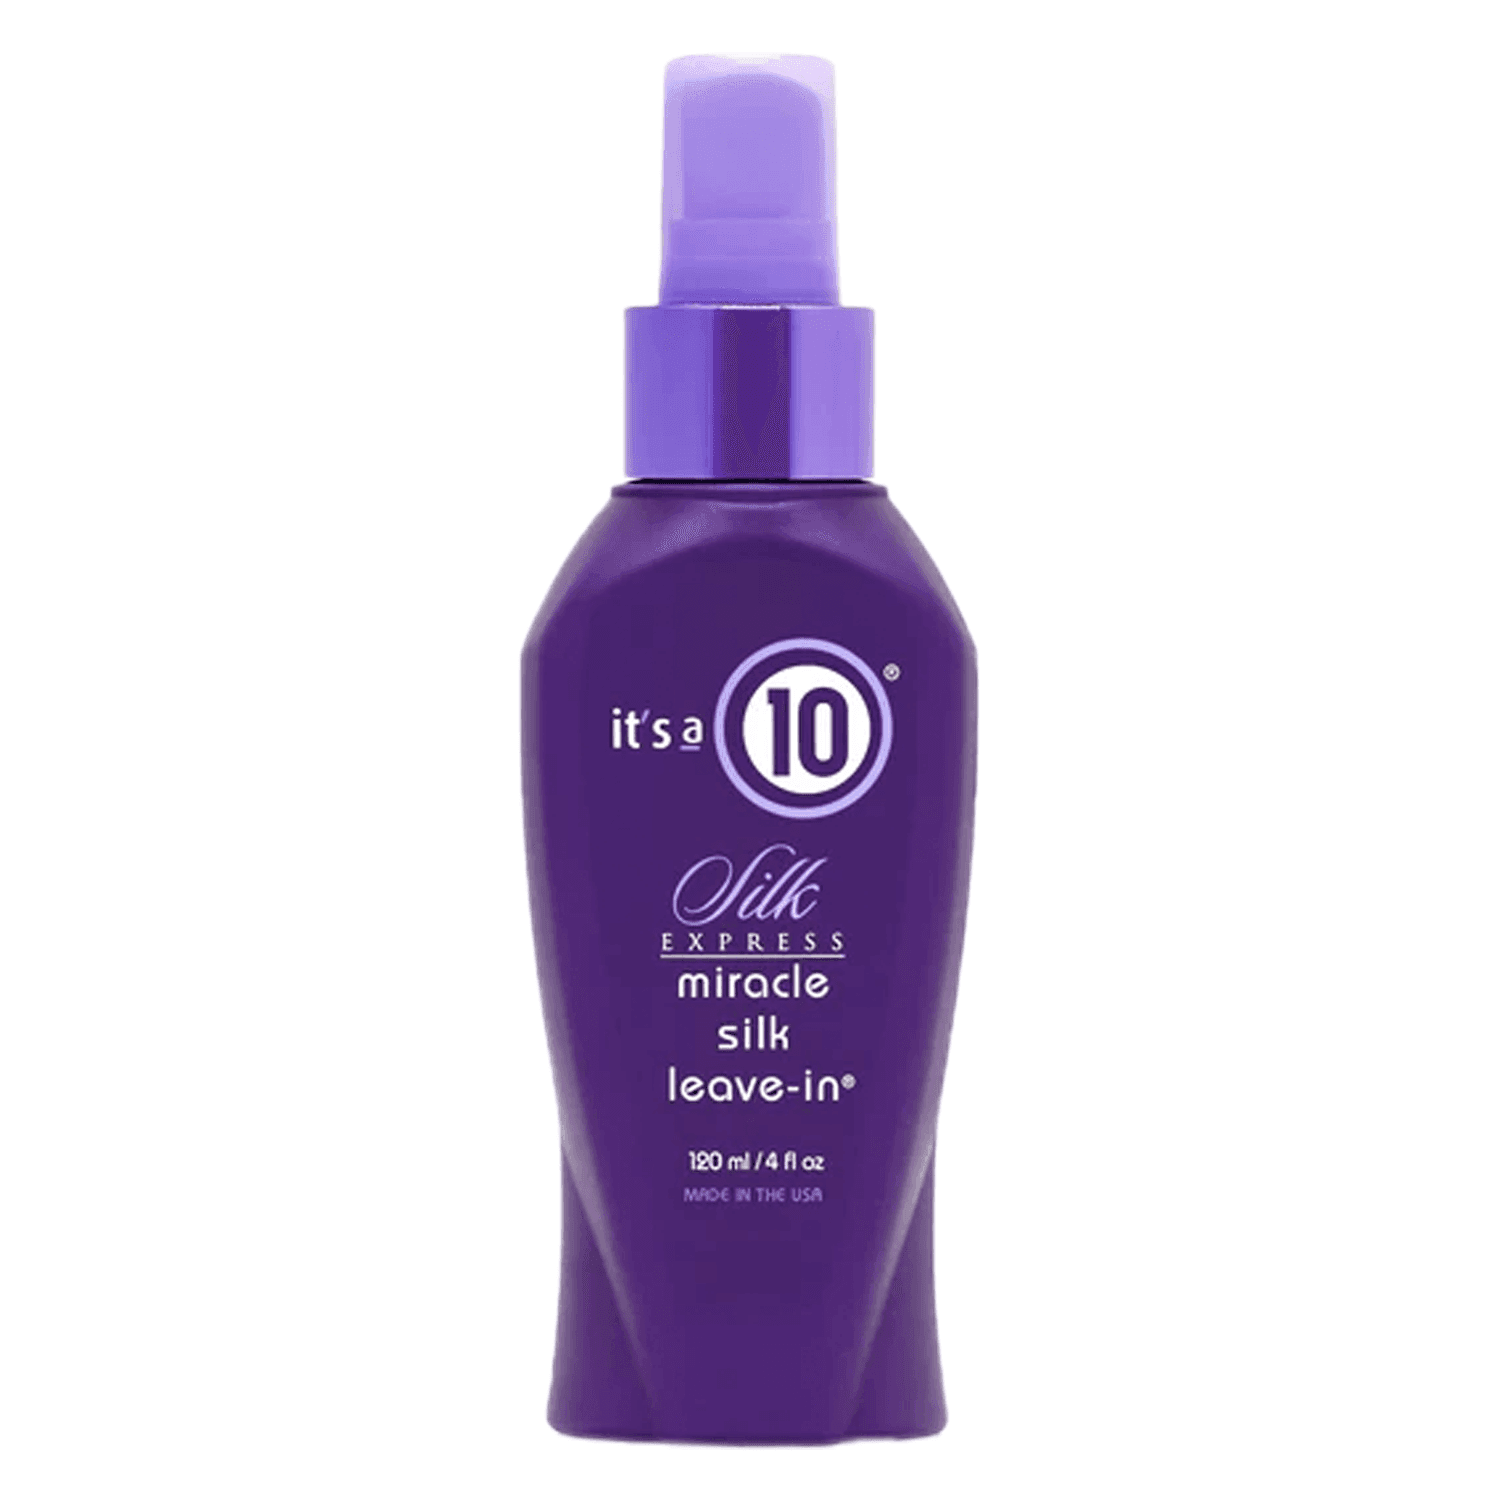 it's a 10 haircare - Silk Express Miracle Leave-In